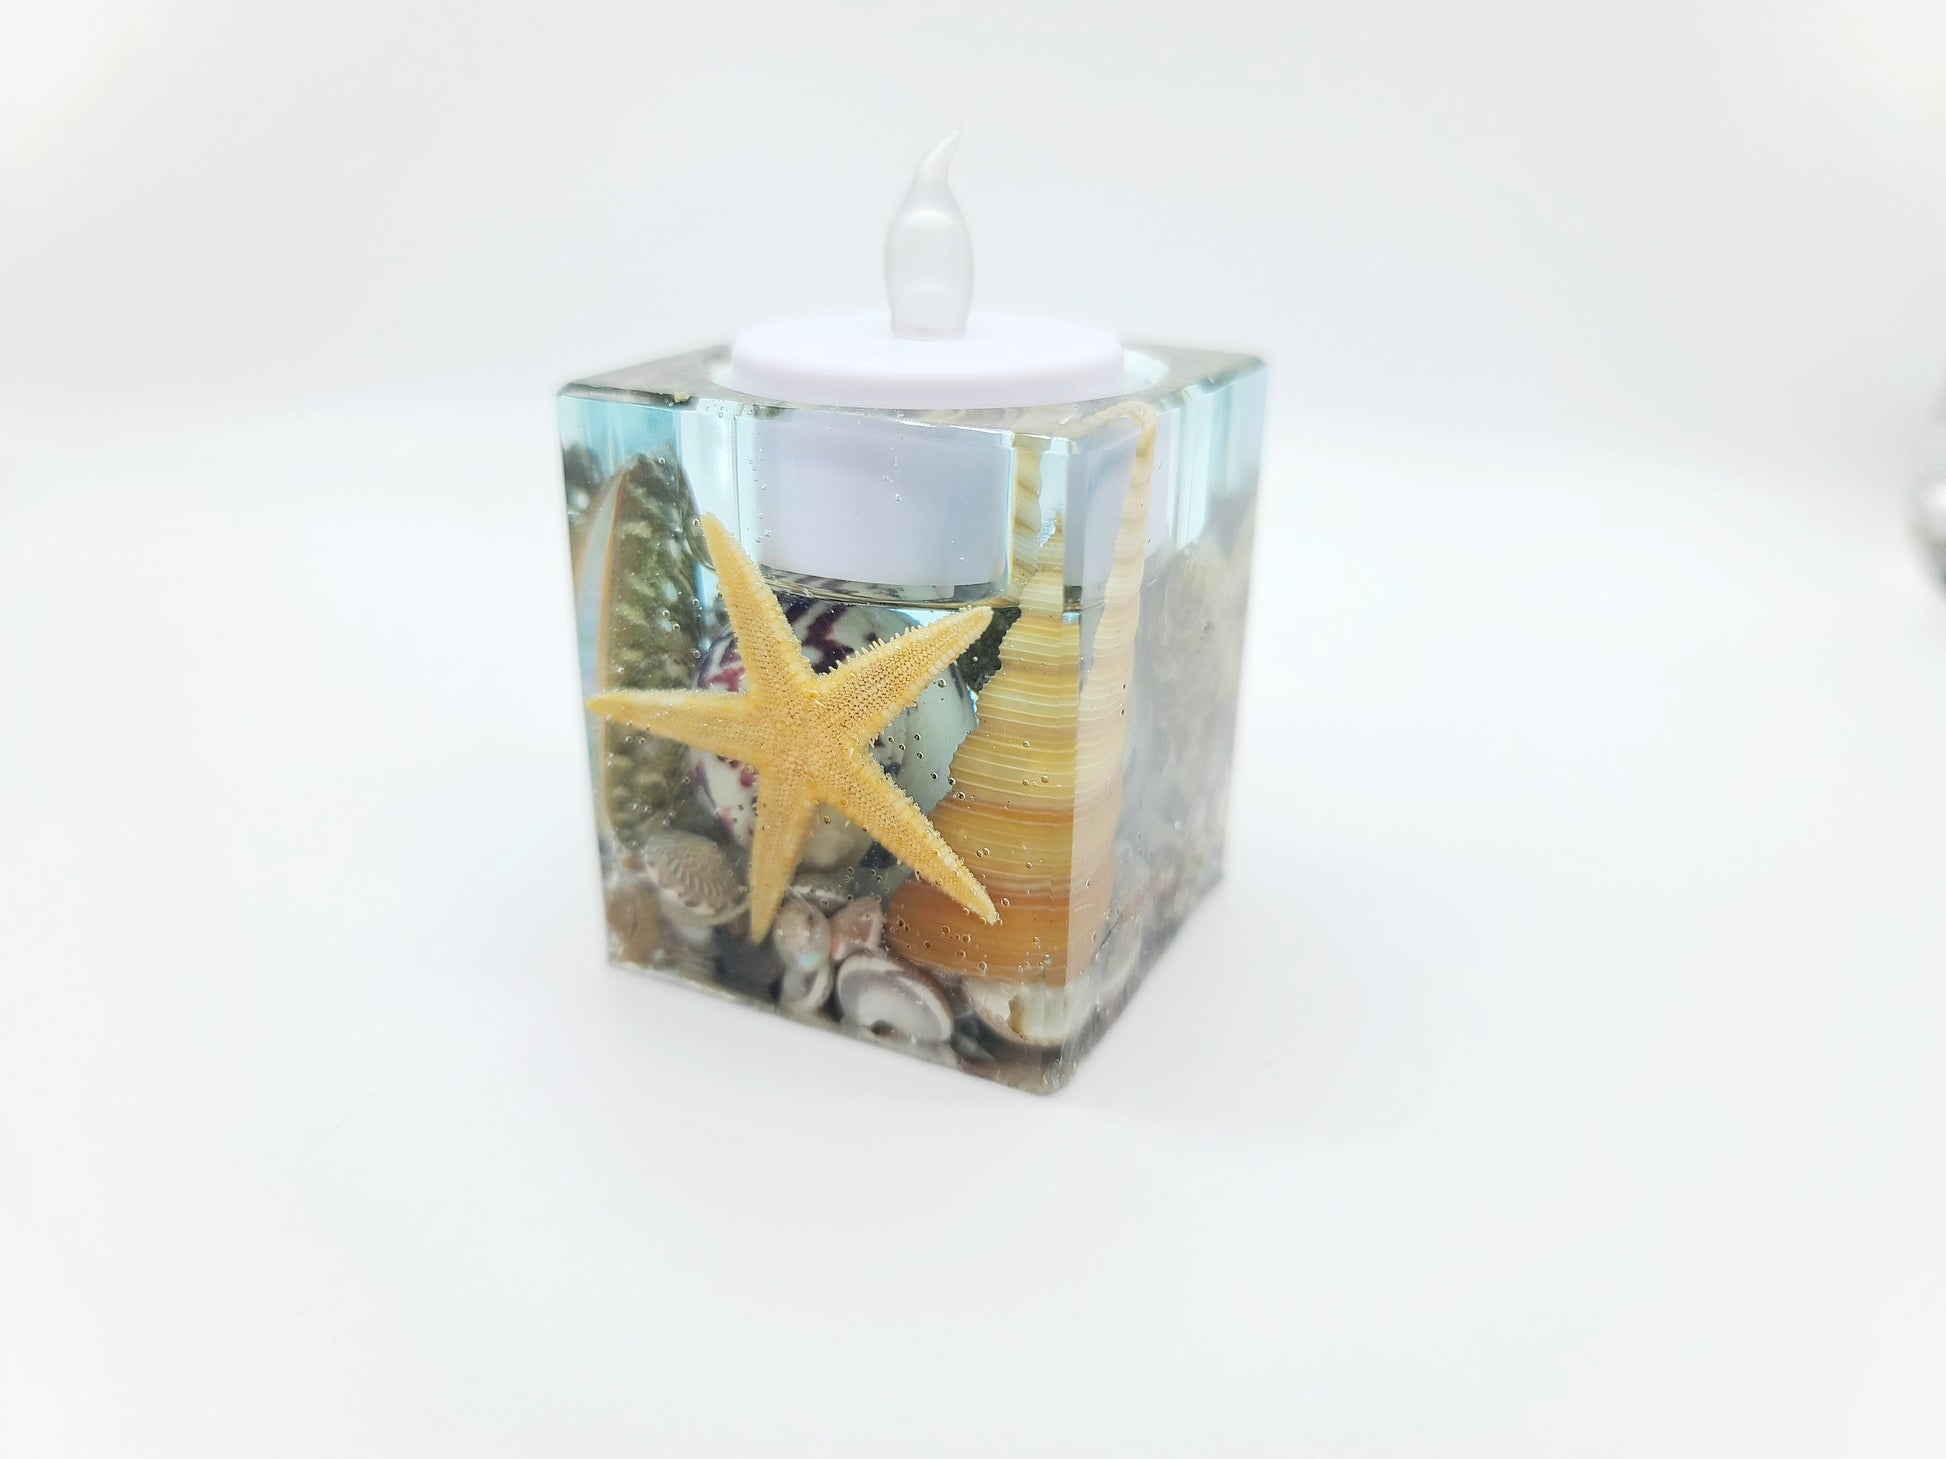 Ocean Themed Square Candle Holder Made w/ Eco-Friendly Epoxy Resin & Seashells - Includes Choice of Real UNSCENTED Tealight or LED Tealight